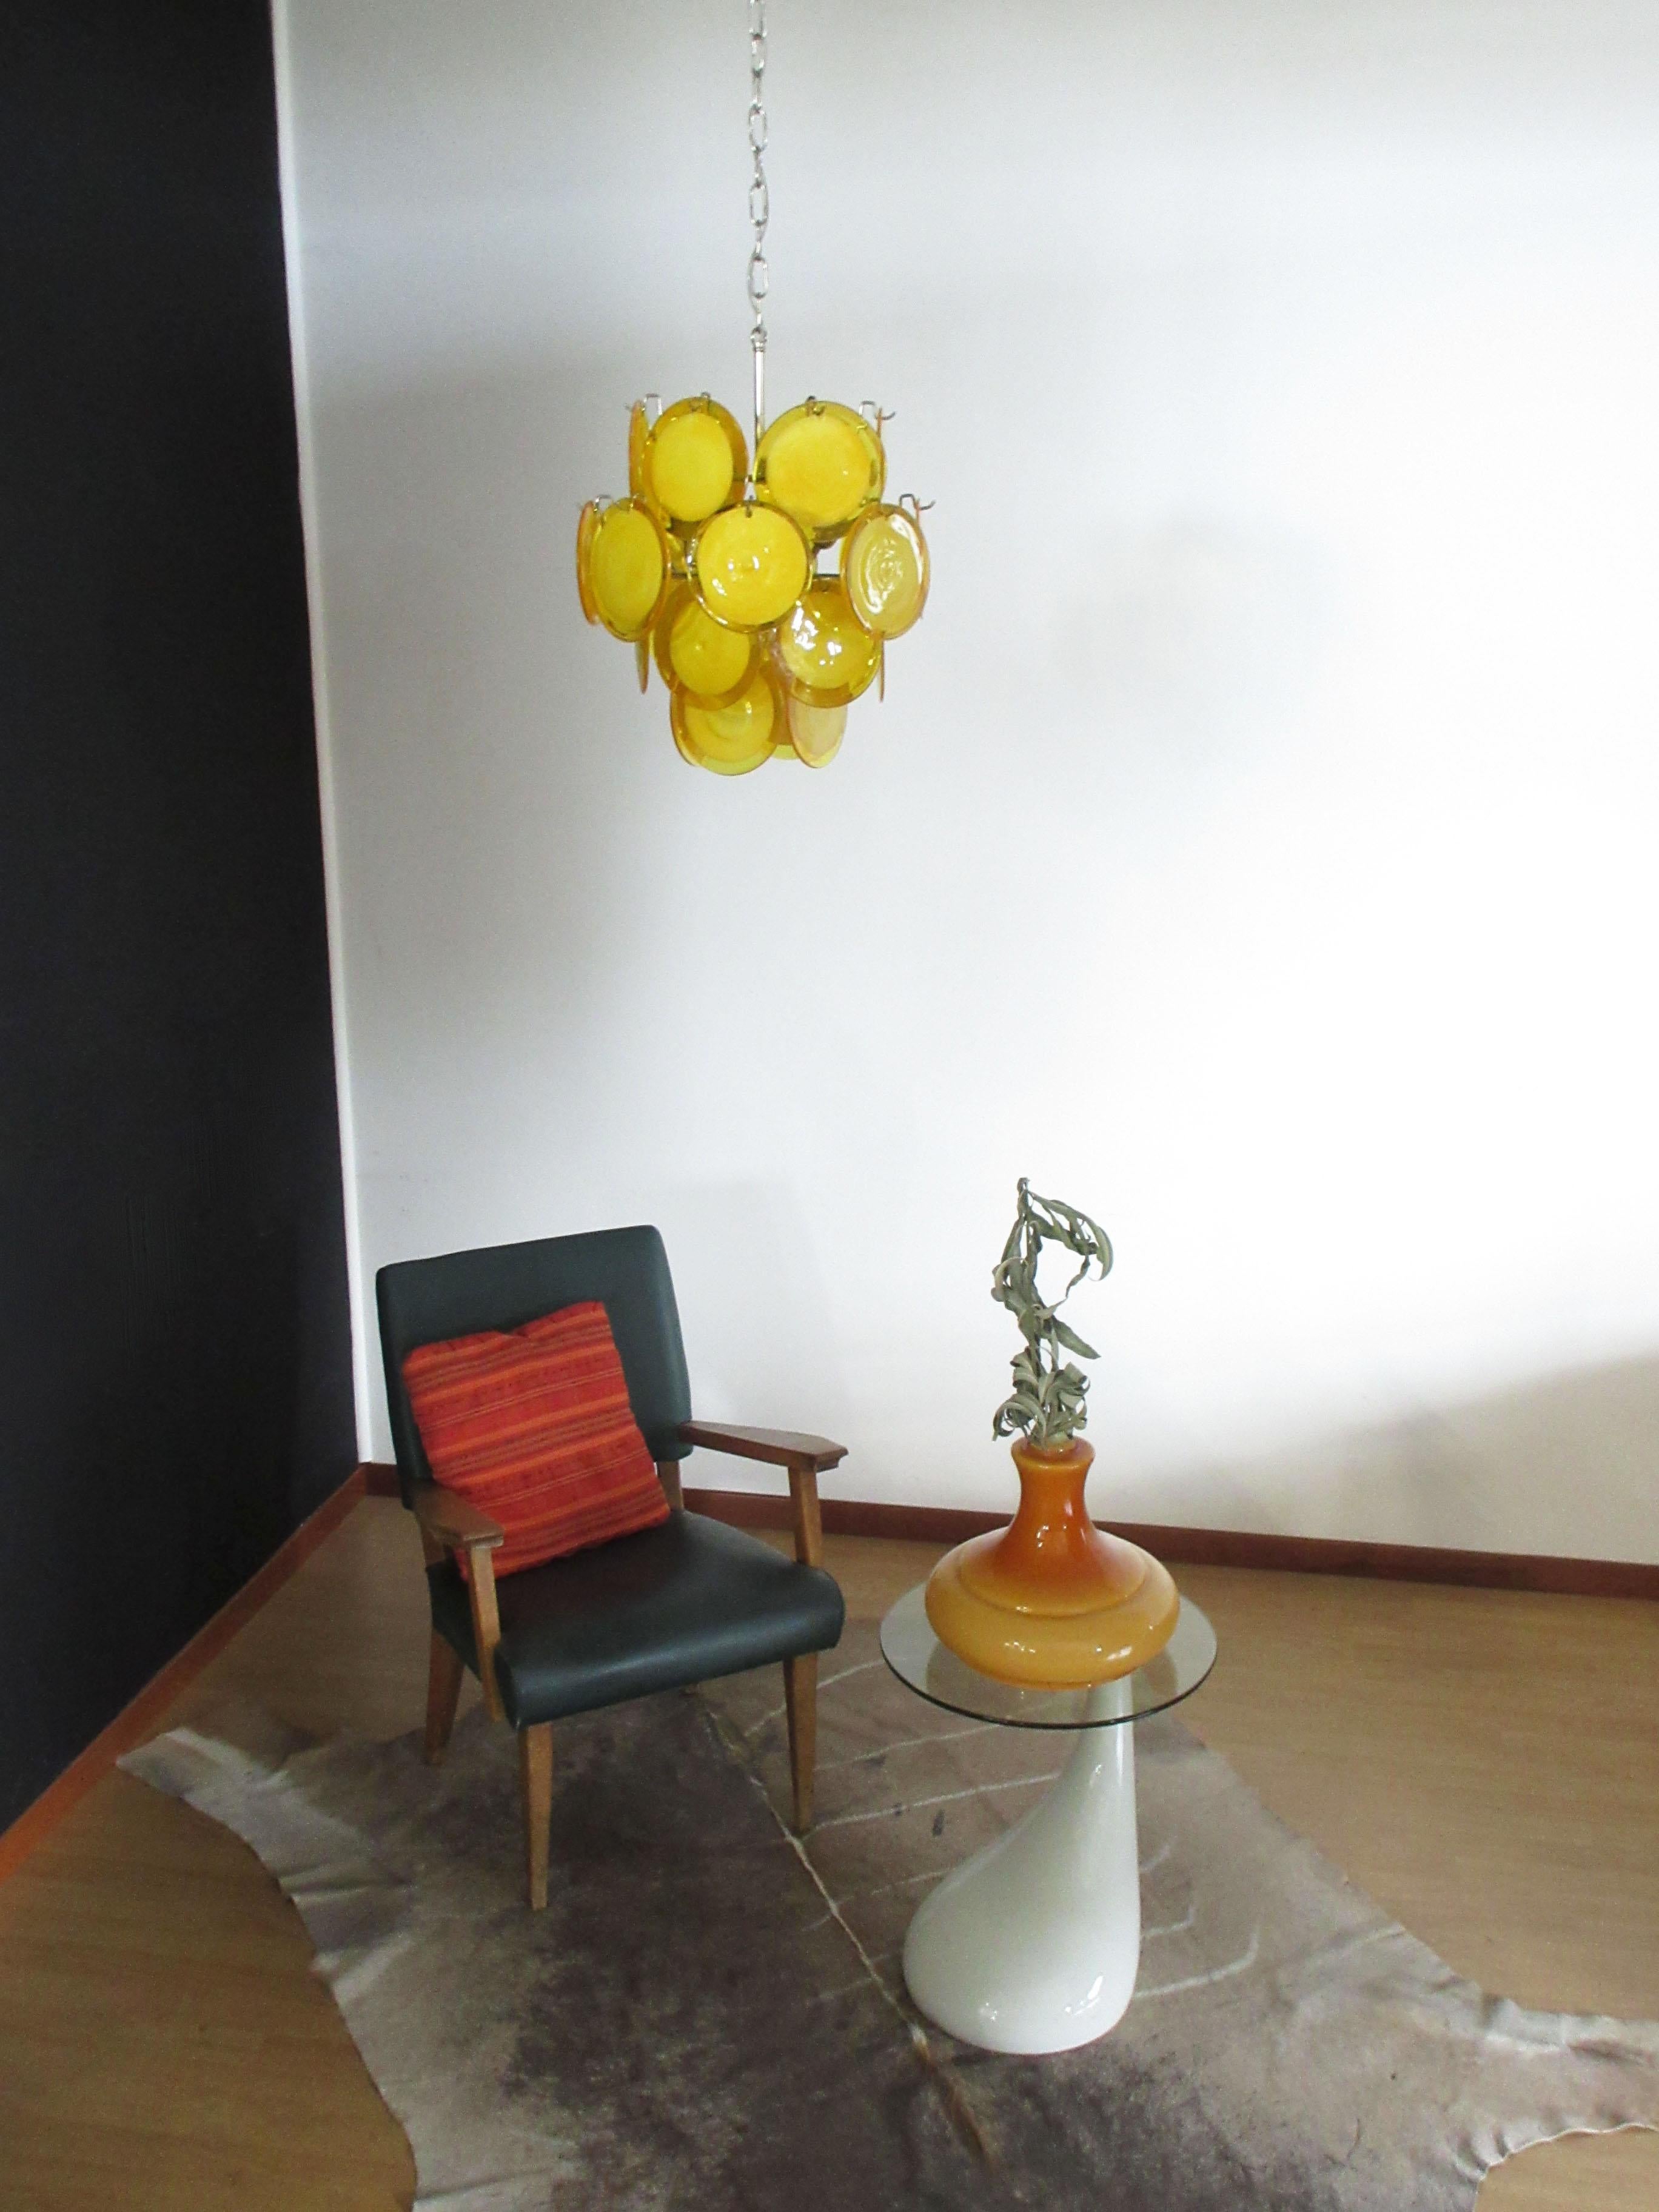 Vintage Italian Murano chandelier in Vistosi style. The chandelier has 24 fantastic Murano yellow disks in a metal frame.
Period: late 20th century
Dimensions: 41,30 inches (105 cm) height with chain; 20,50 inches (52 cm) height without chain;